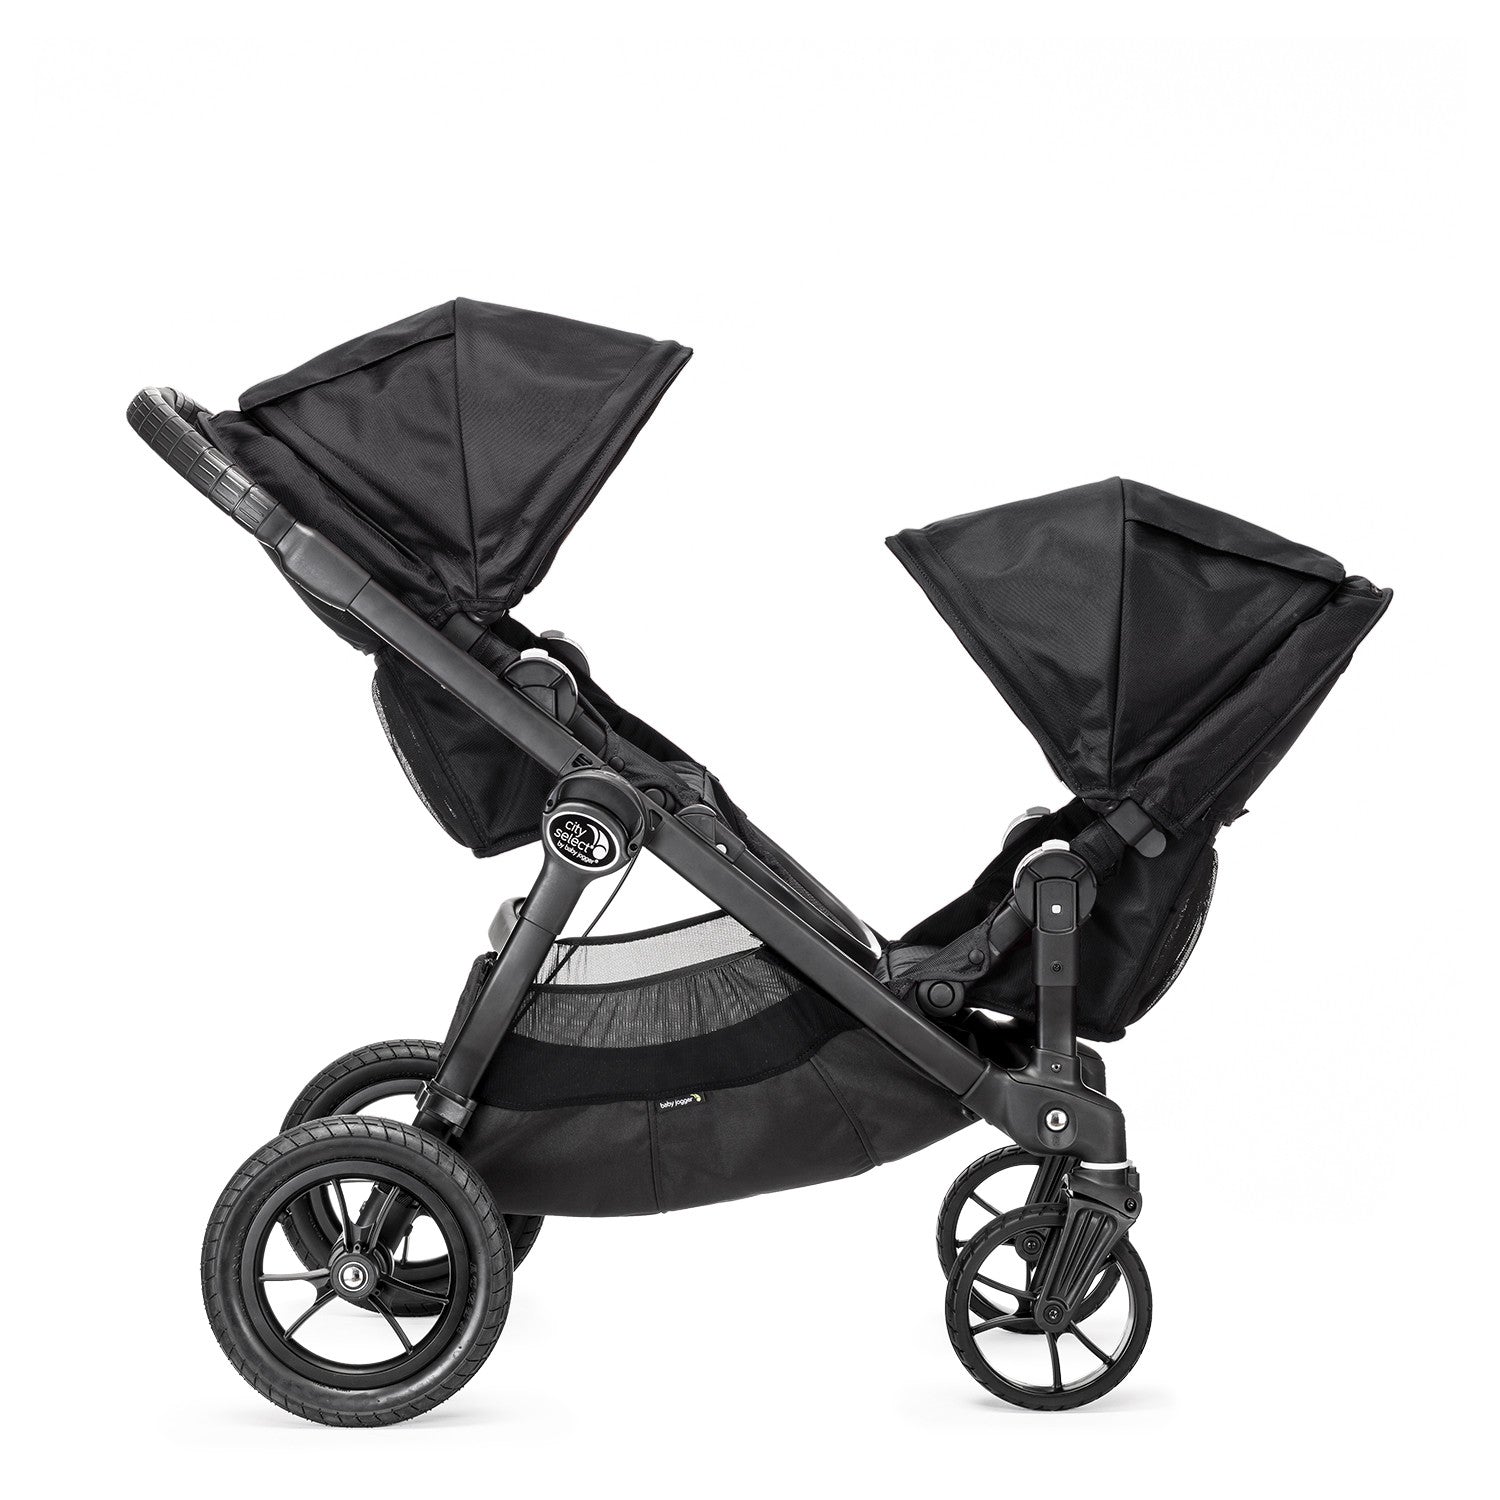 Select Double Stroller available at Peppy Parents – PeppyParents